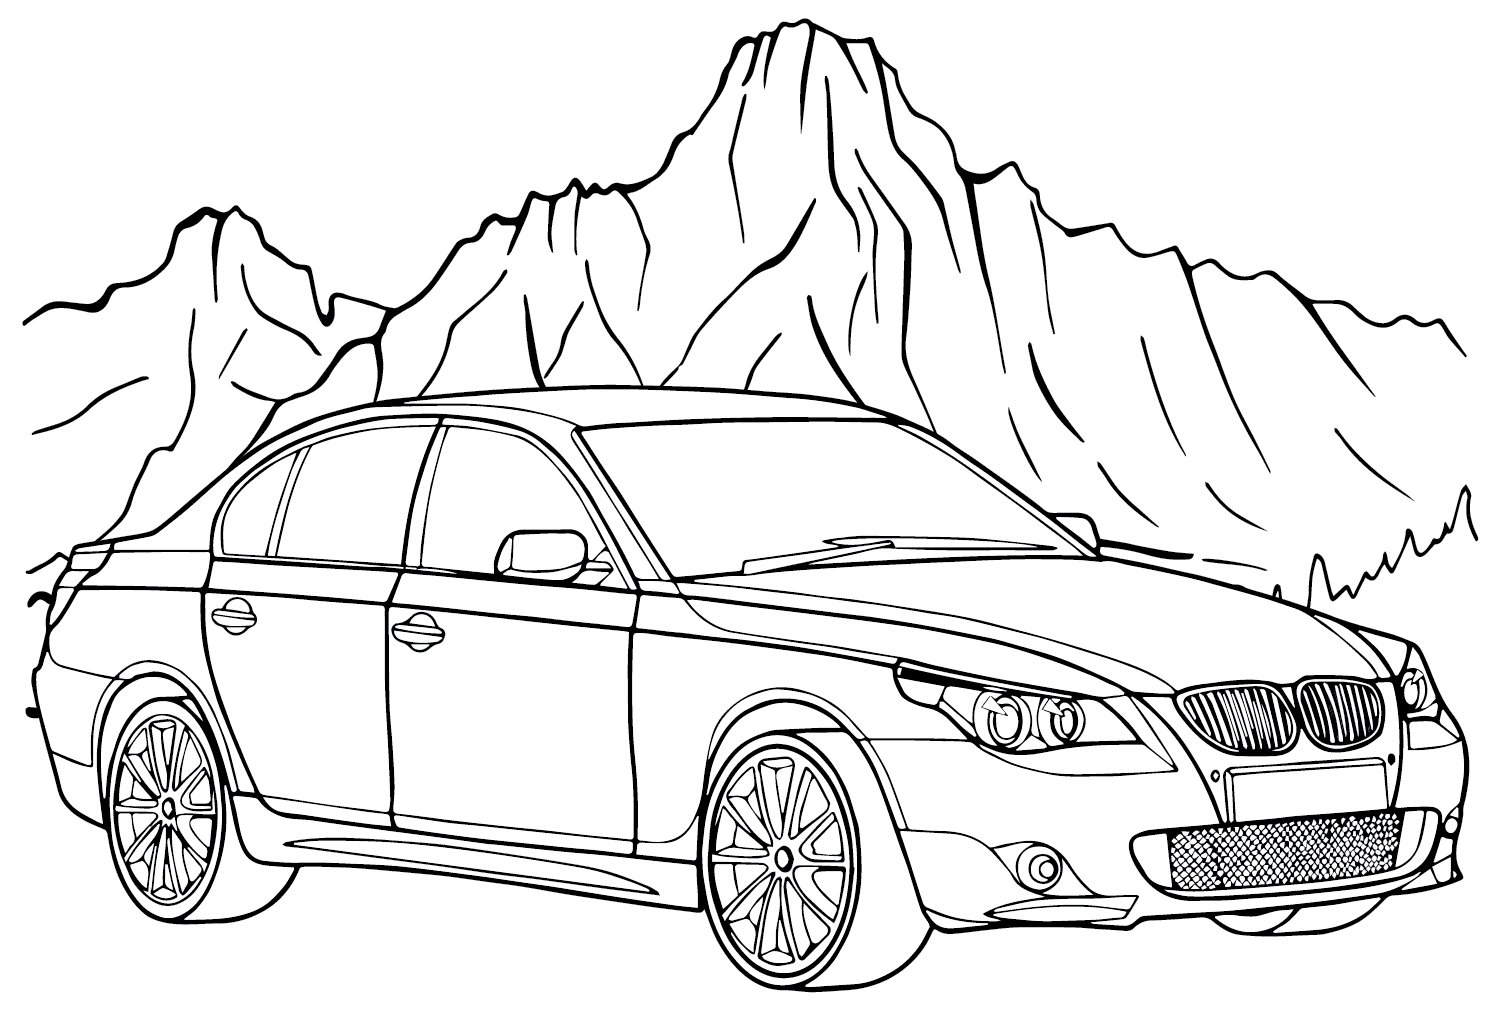 BMW X6 Coloring Page from BMW